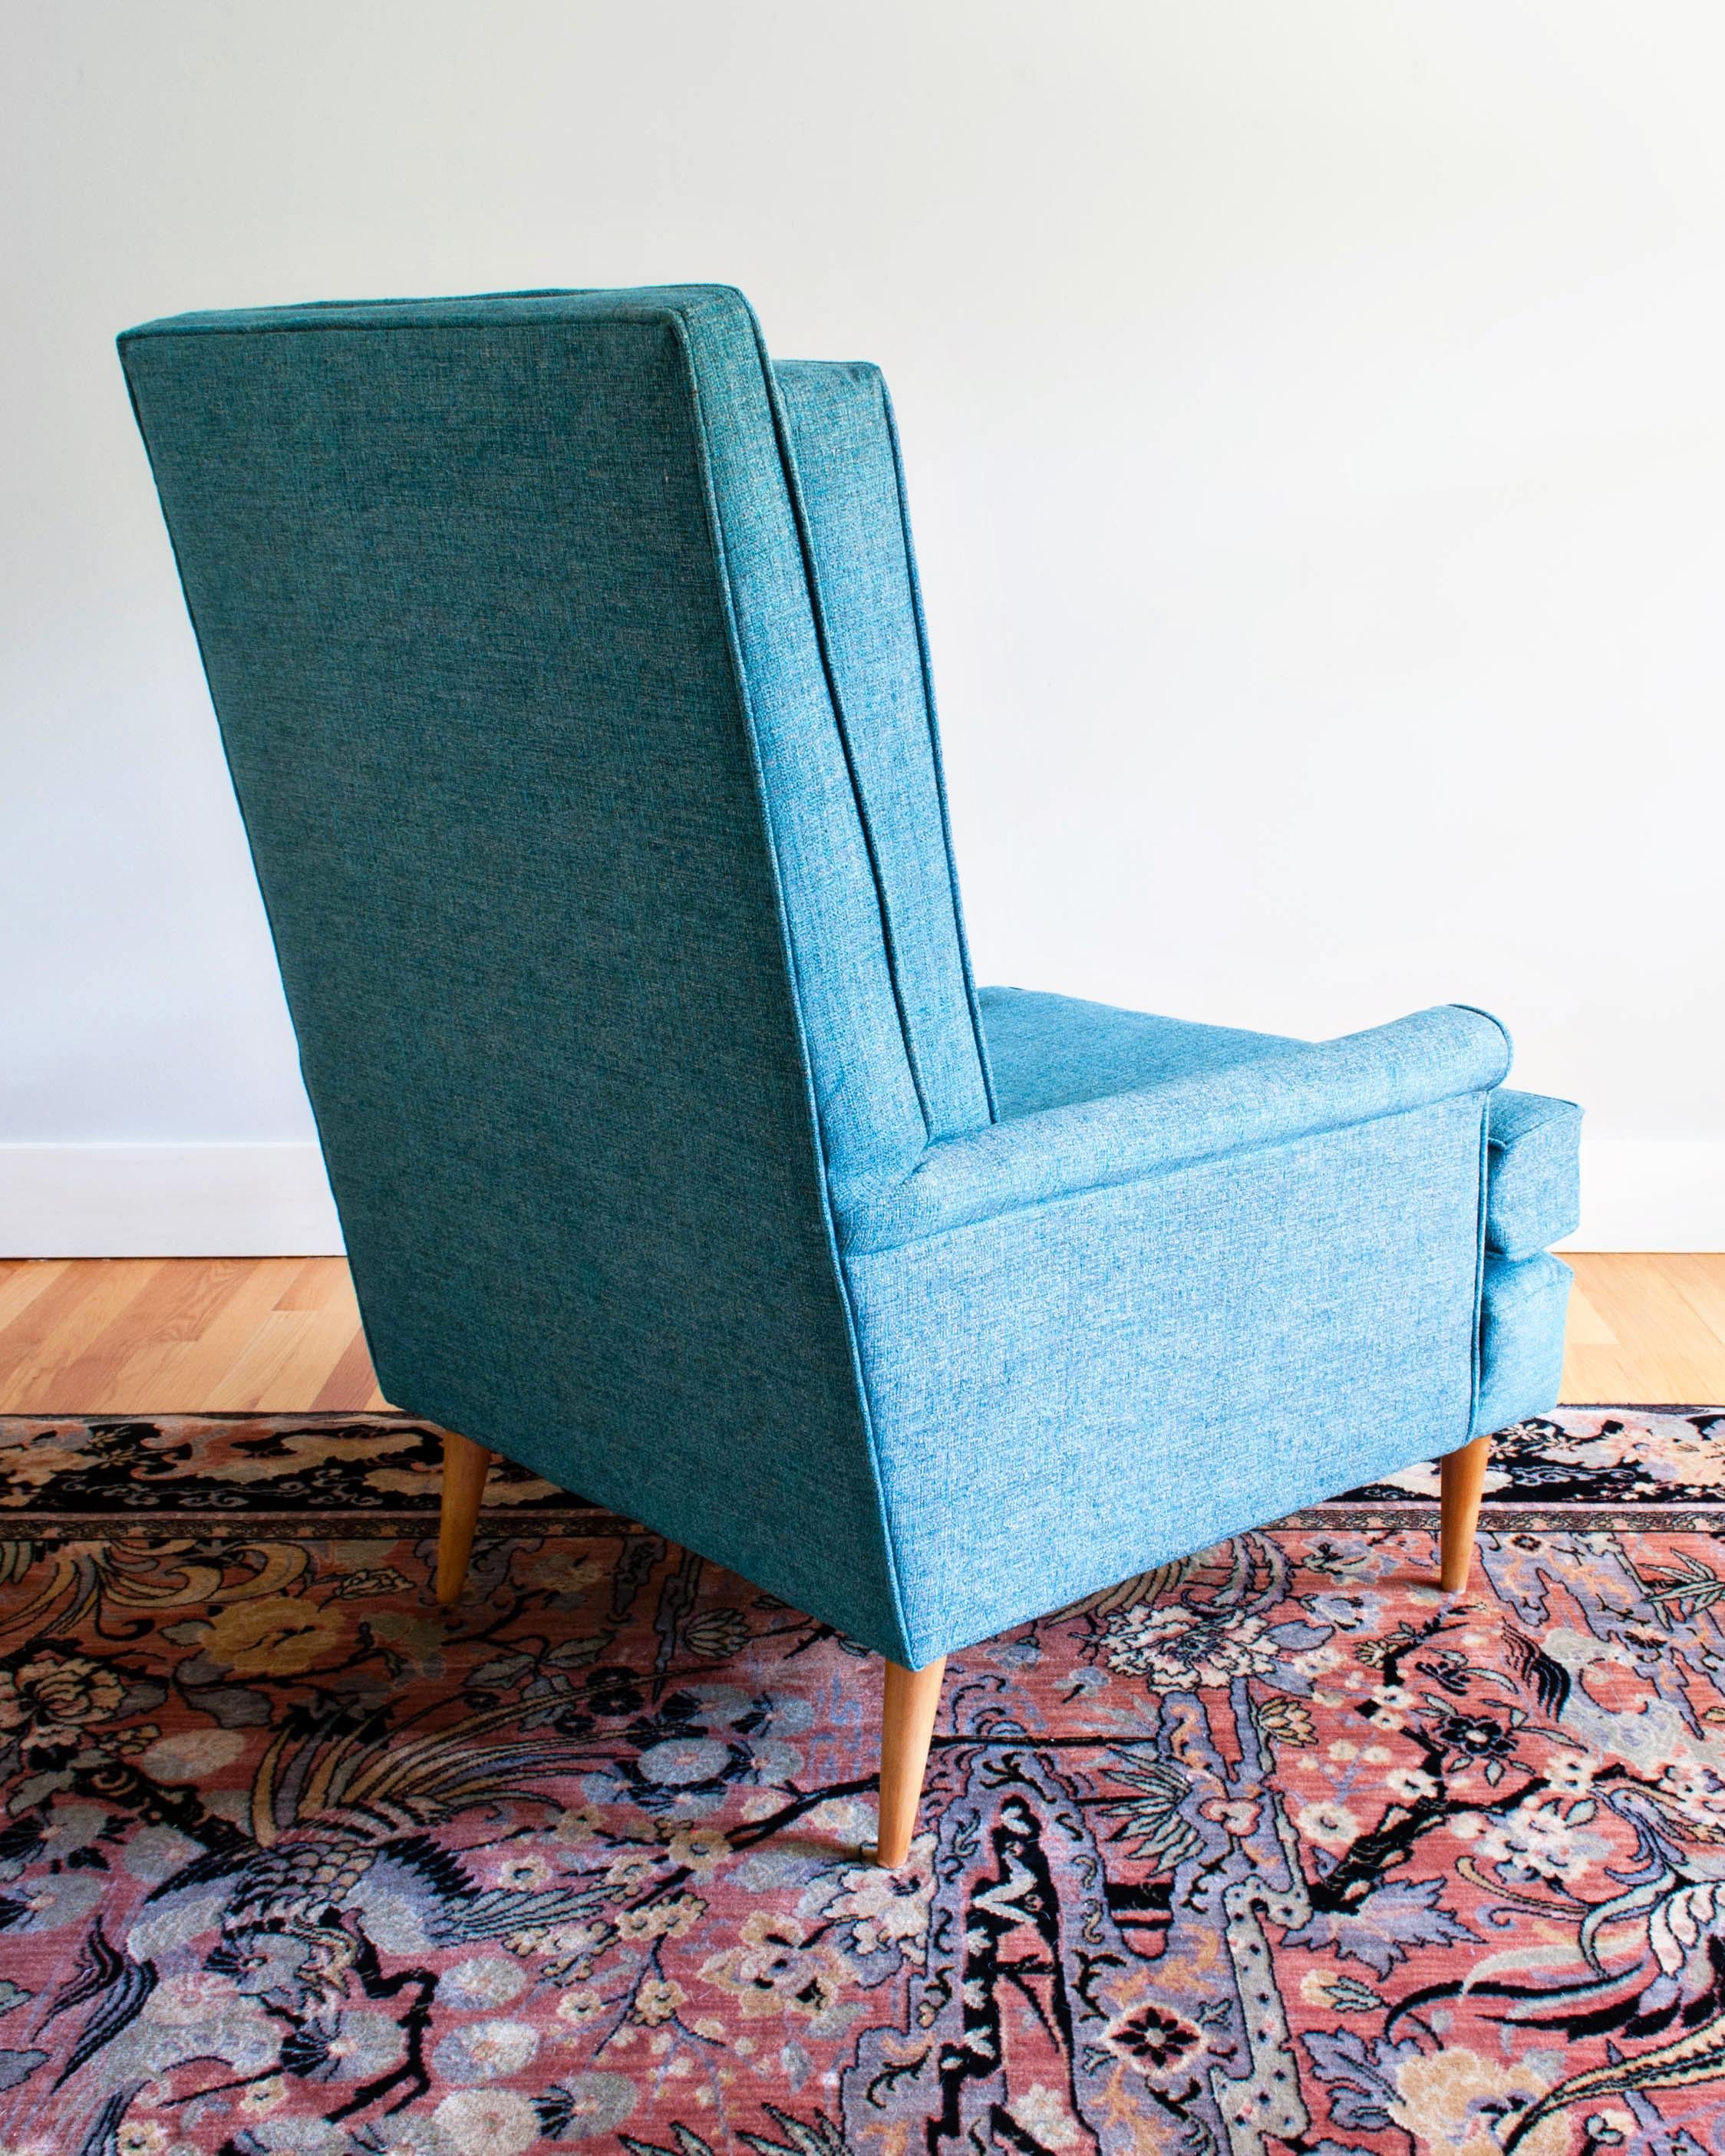 Midcentury Upholstered Highback Chair and Ottoman In Excellent Condition For Sale In Bridport, CT